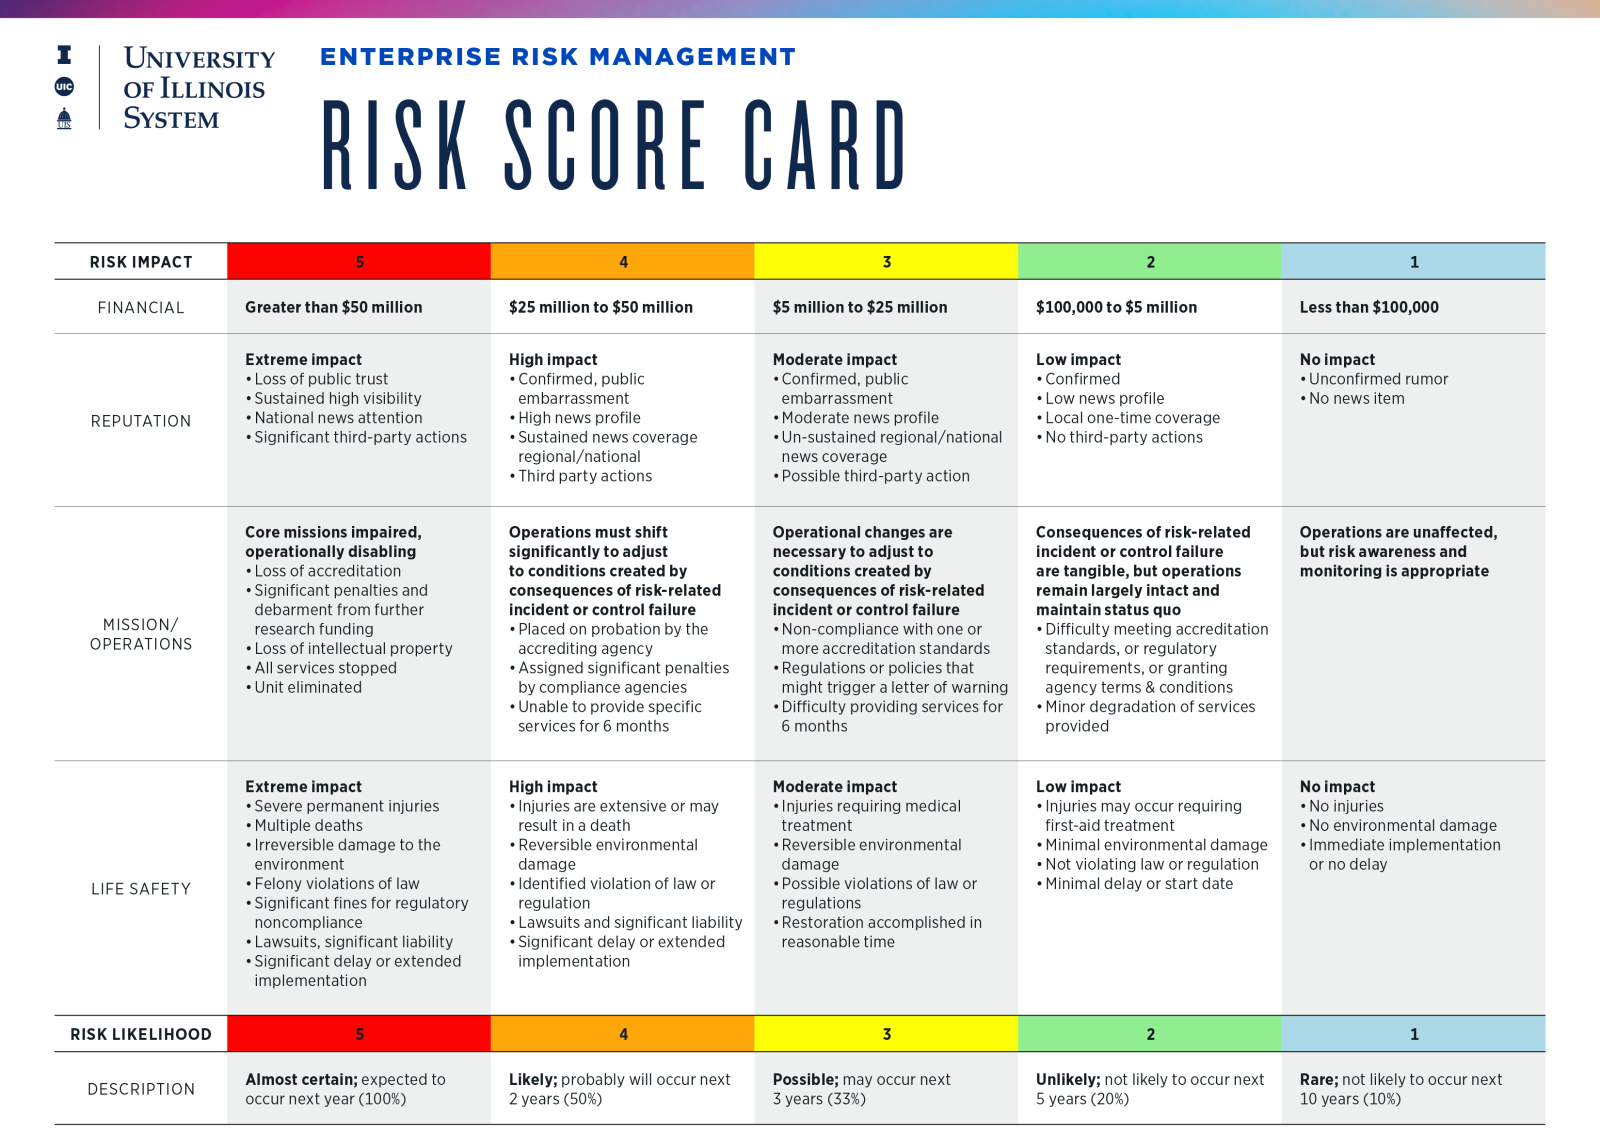 A table ranking impact and likelihood of risks from a score of 1 to 5.